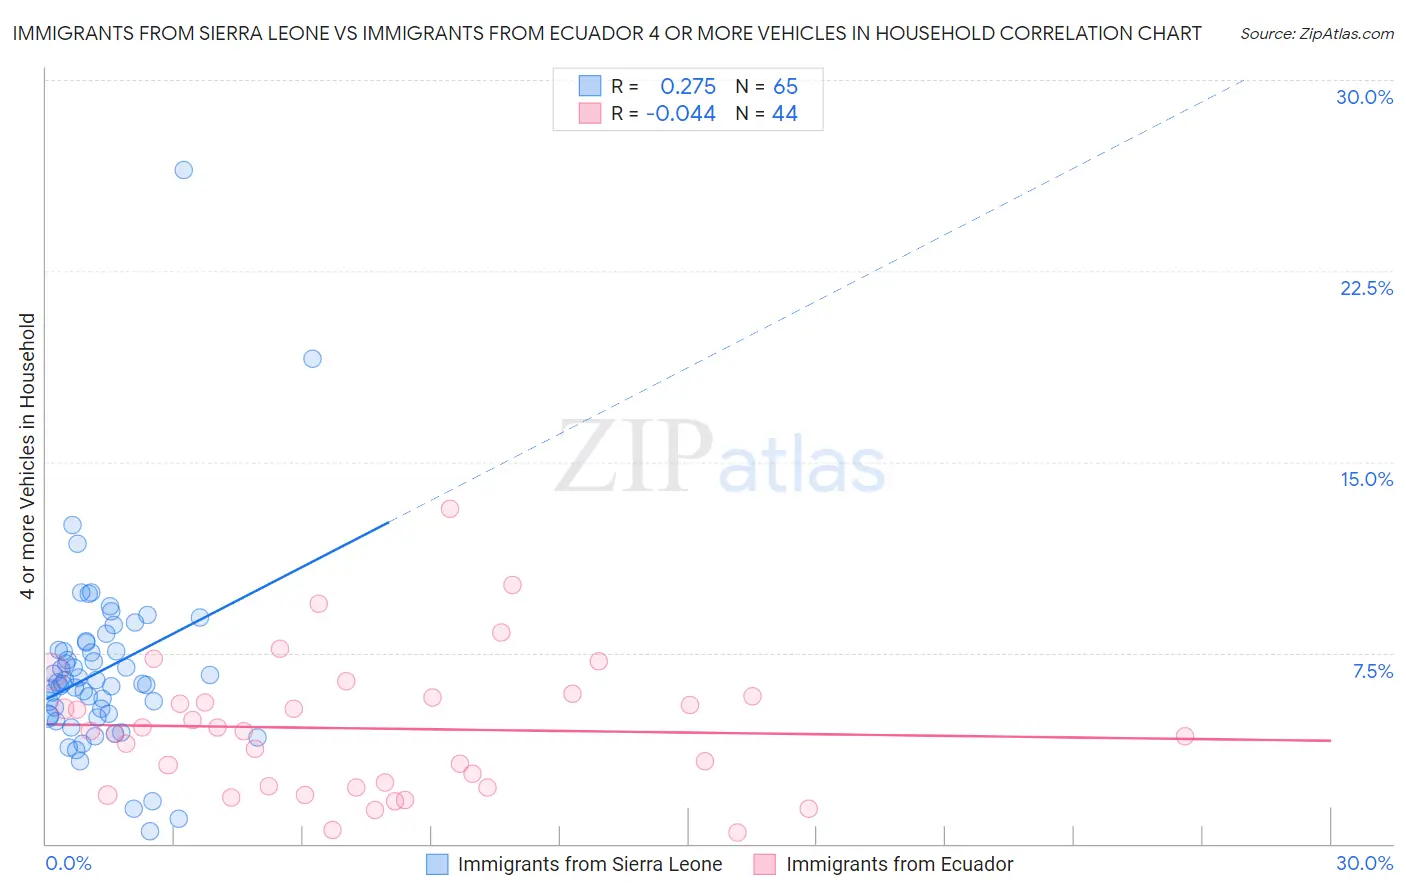 Immigrants from Sierra Leone vs Immigrants from Ecuador 4 or more Vehicles in Household